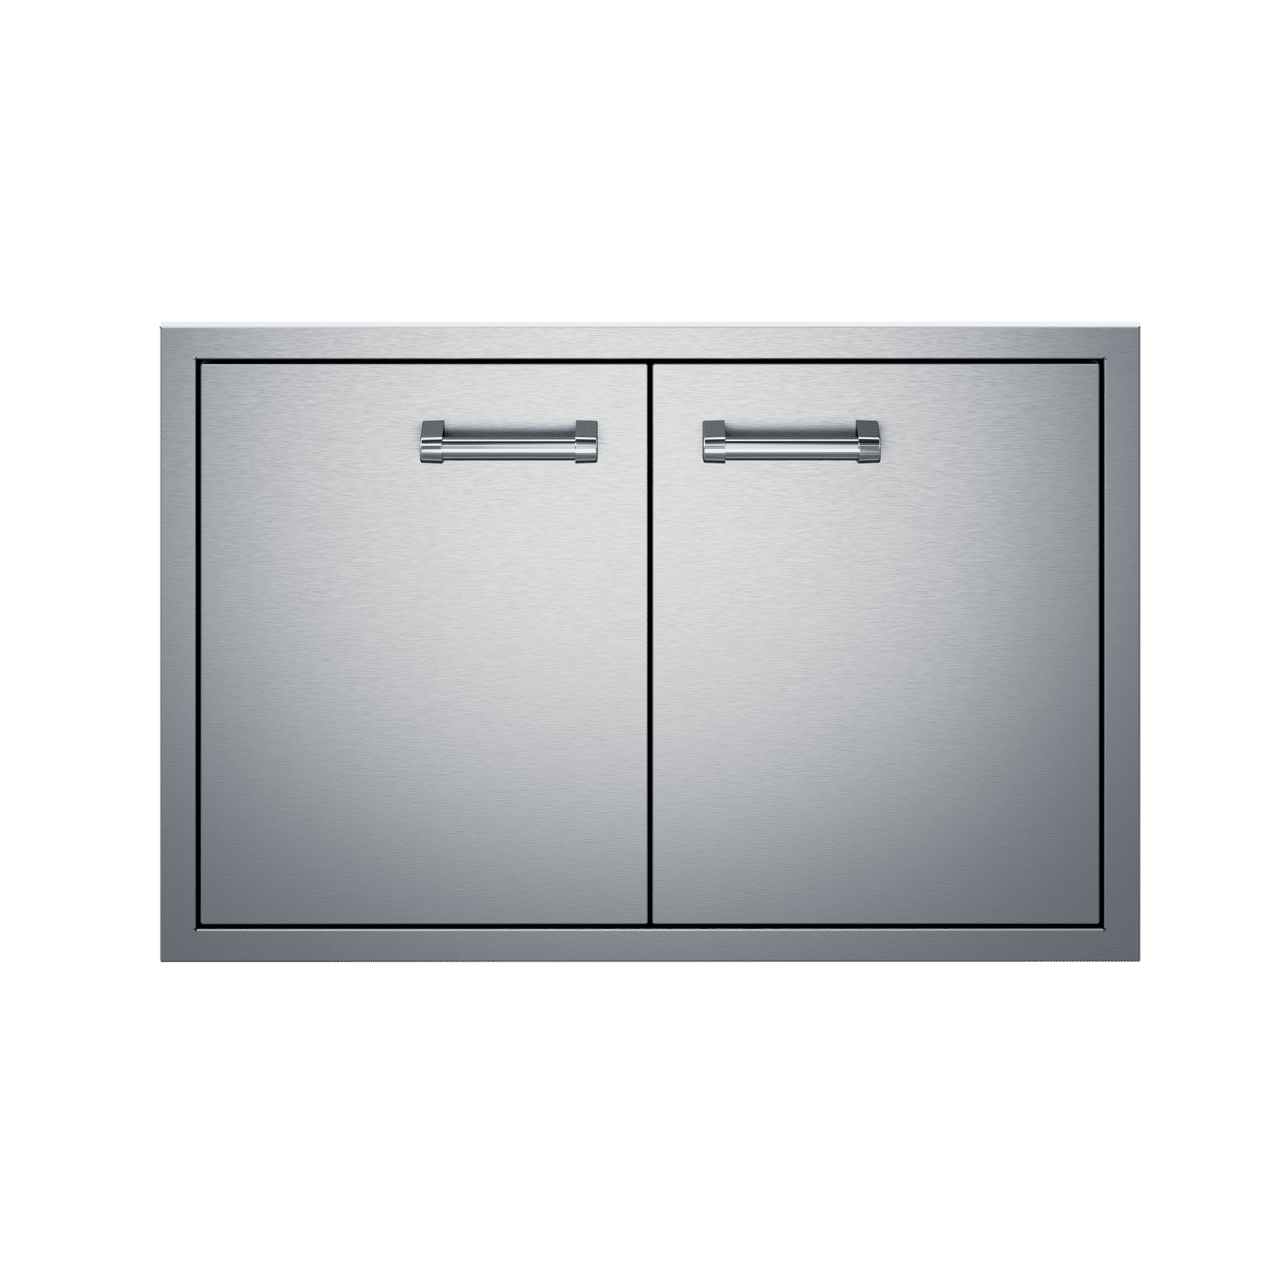 Delta Heat Stainless Steel Double Access Doors Cabinets & Storage 32" Wide x 19" Tall 12026388